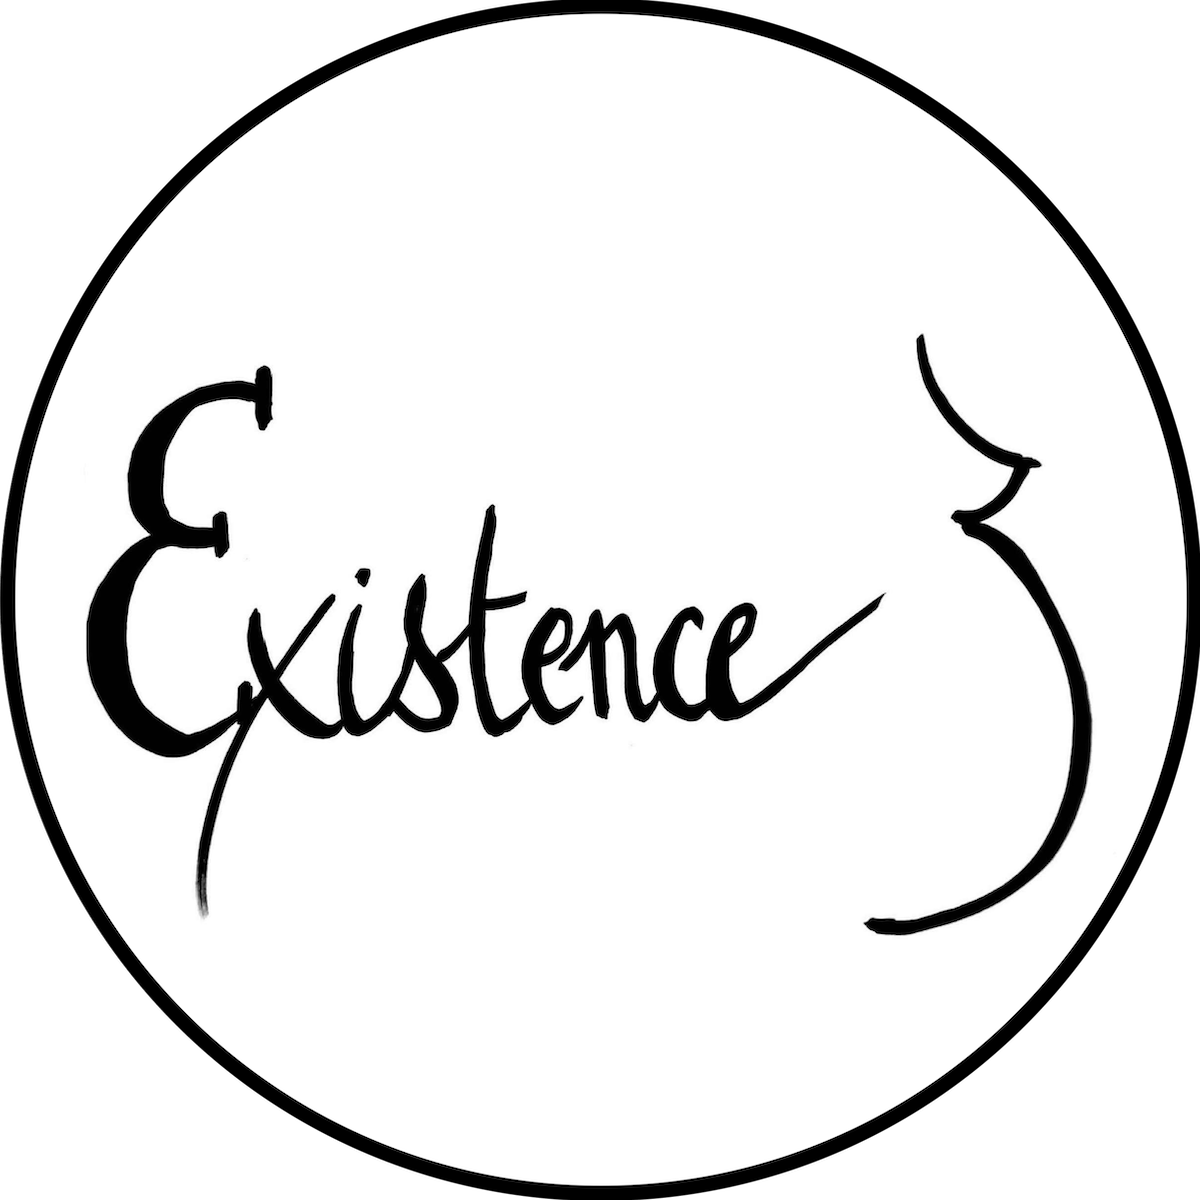 Existence B